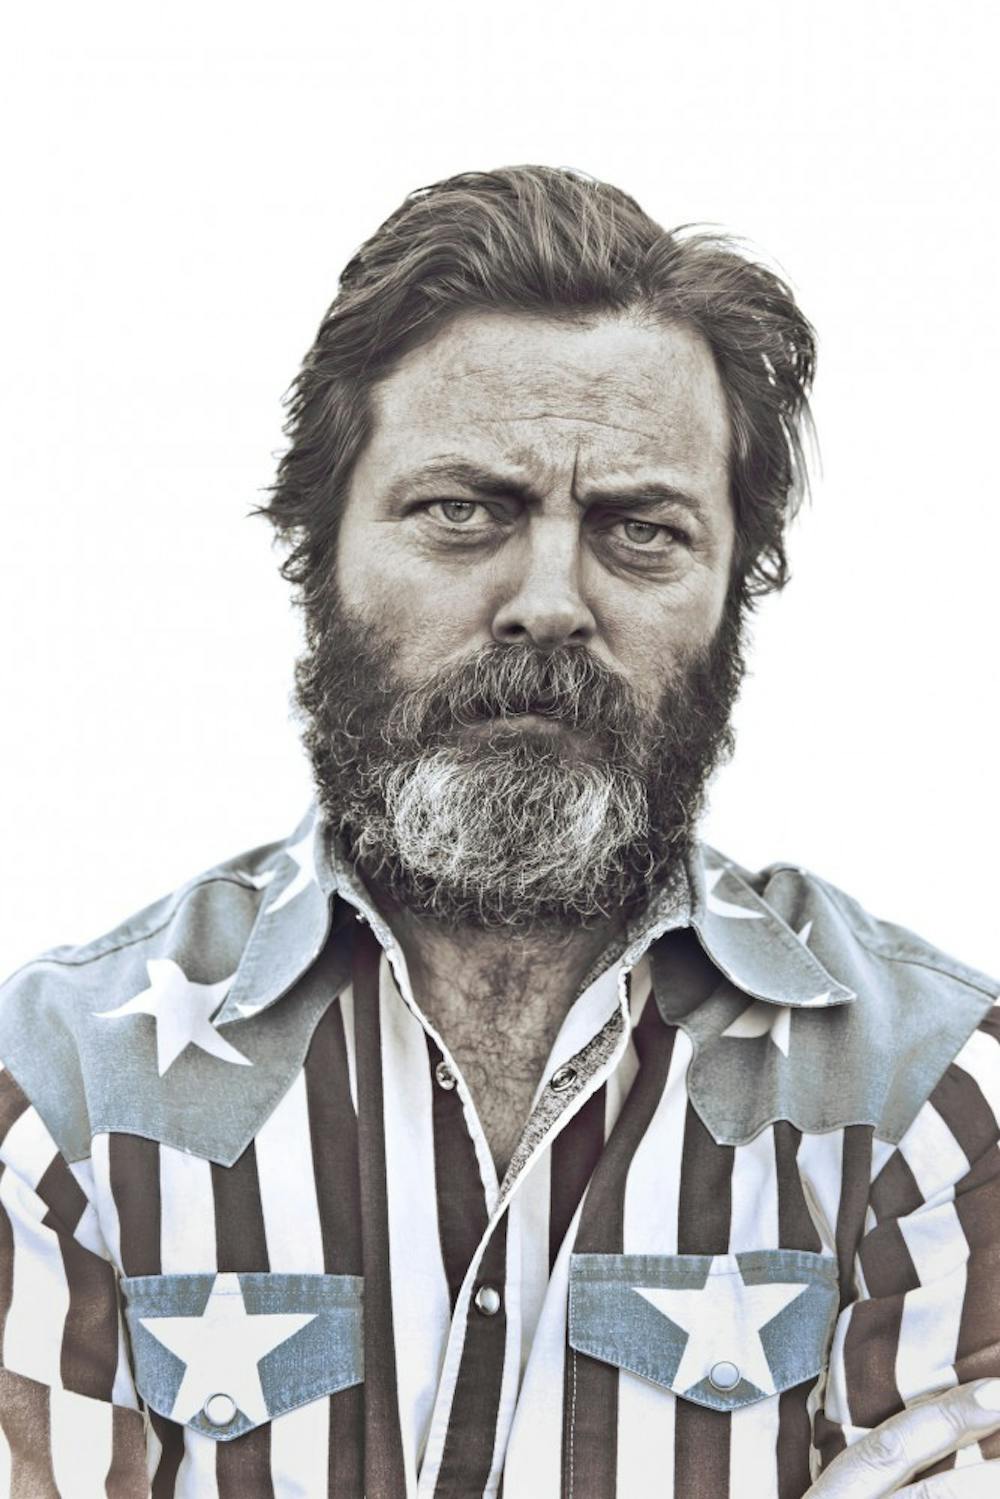 <p>Nick Offerman will perform for the Student Association's 15th annual Comedy Series in Alumni Arena on April 2. Offerman is most well known for his role as Nick Swanson on the NBC comedy series "Parks and Recreation."&nbsp;</p>